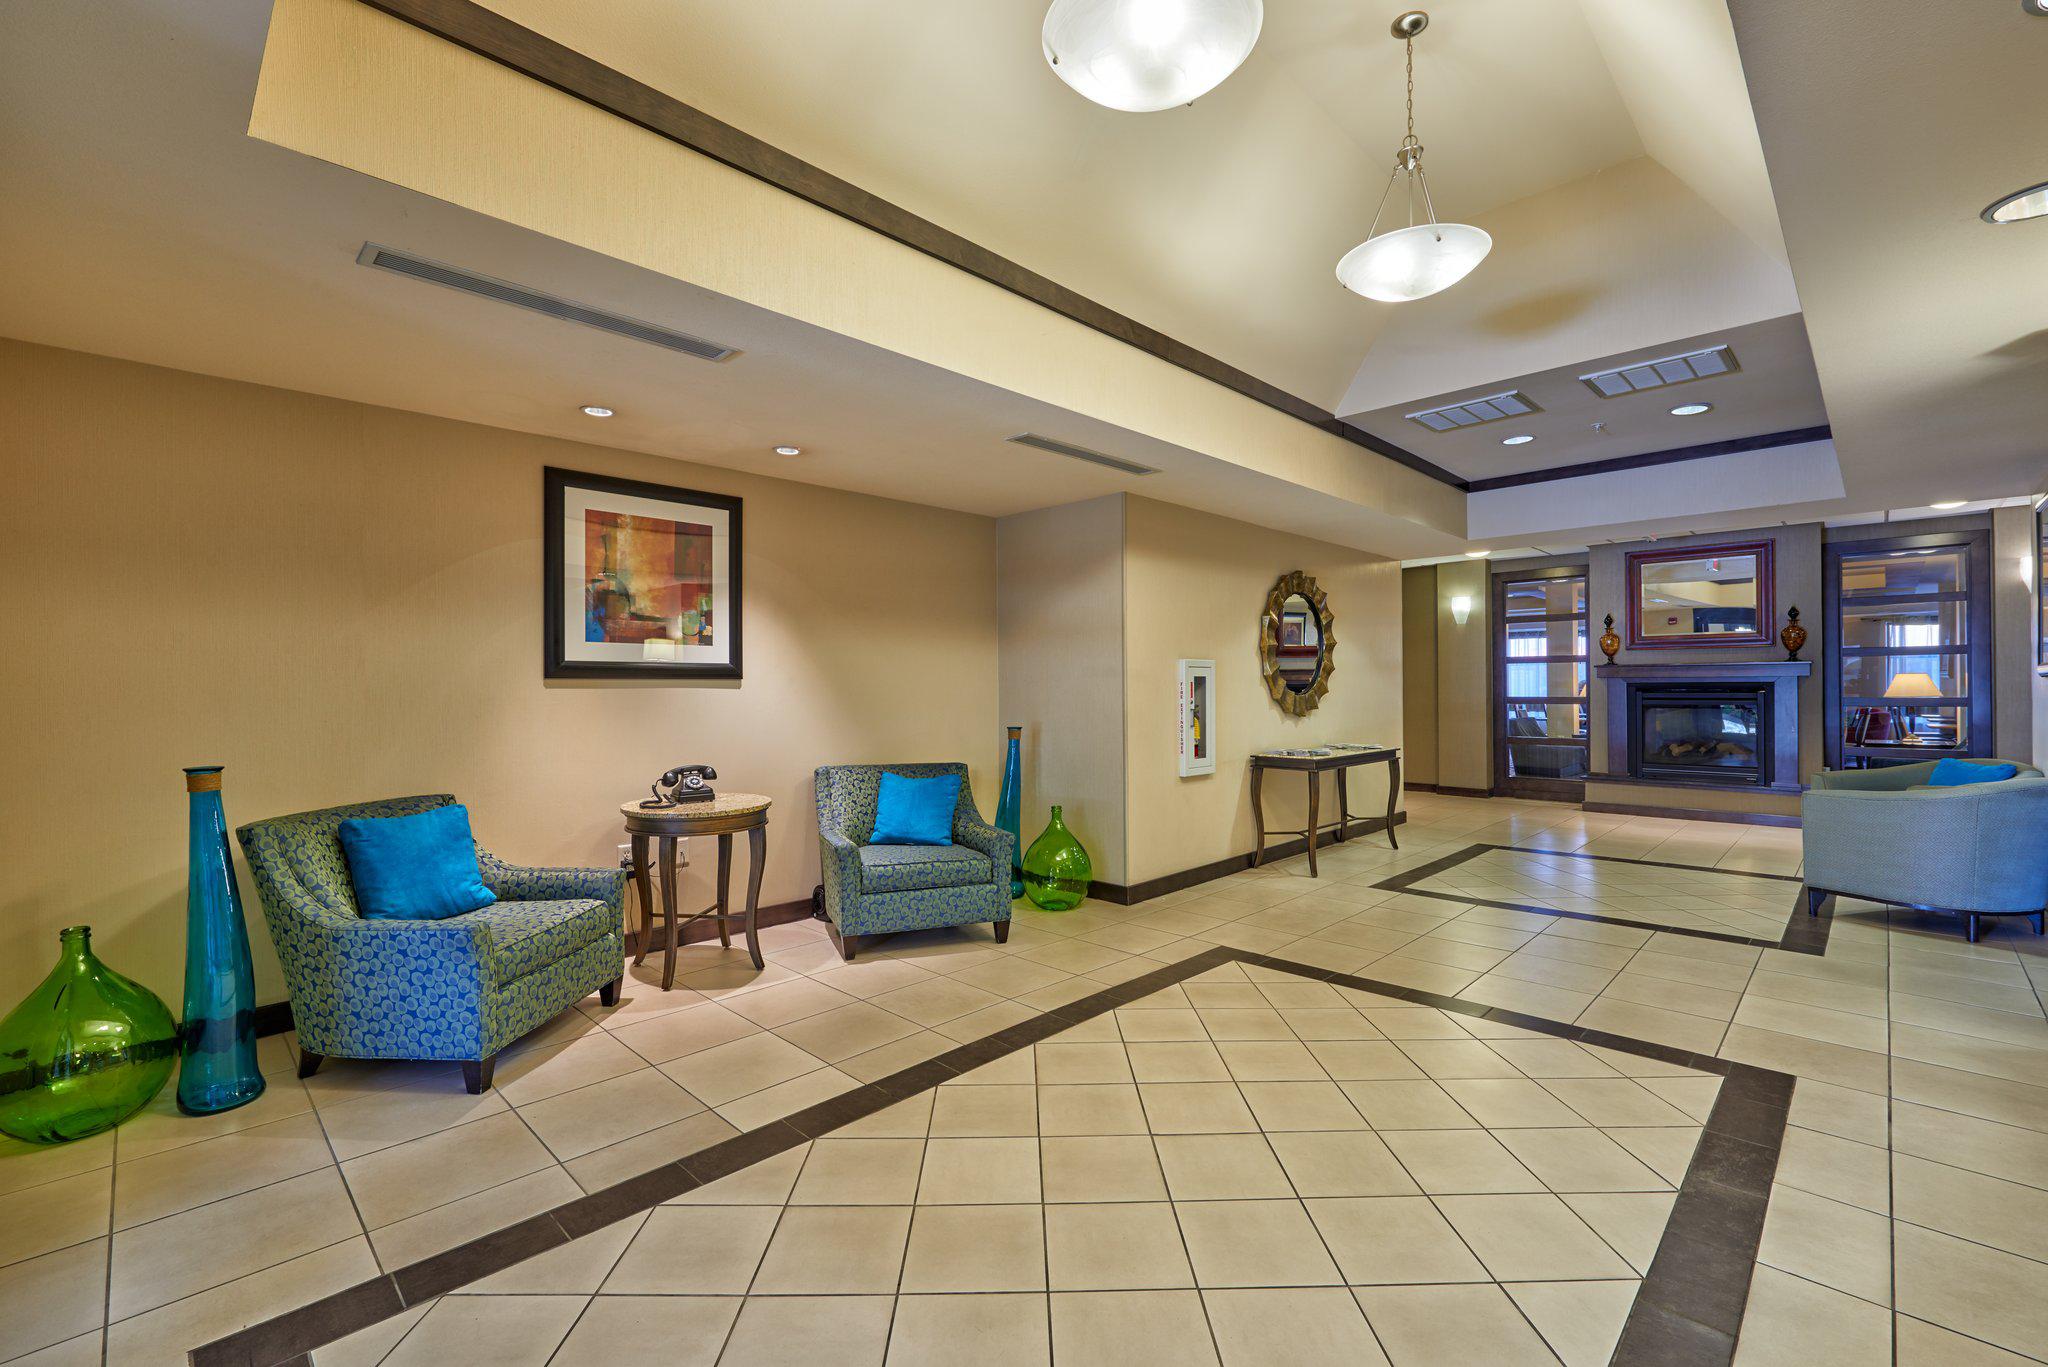 Holiday Inn Express & Suites El Paso Airport Photo